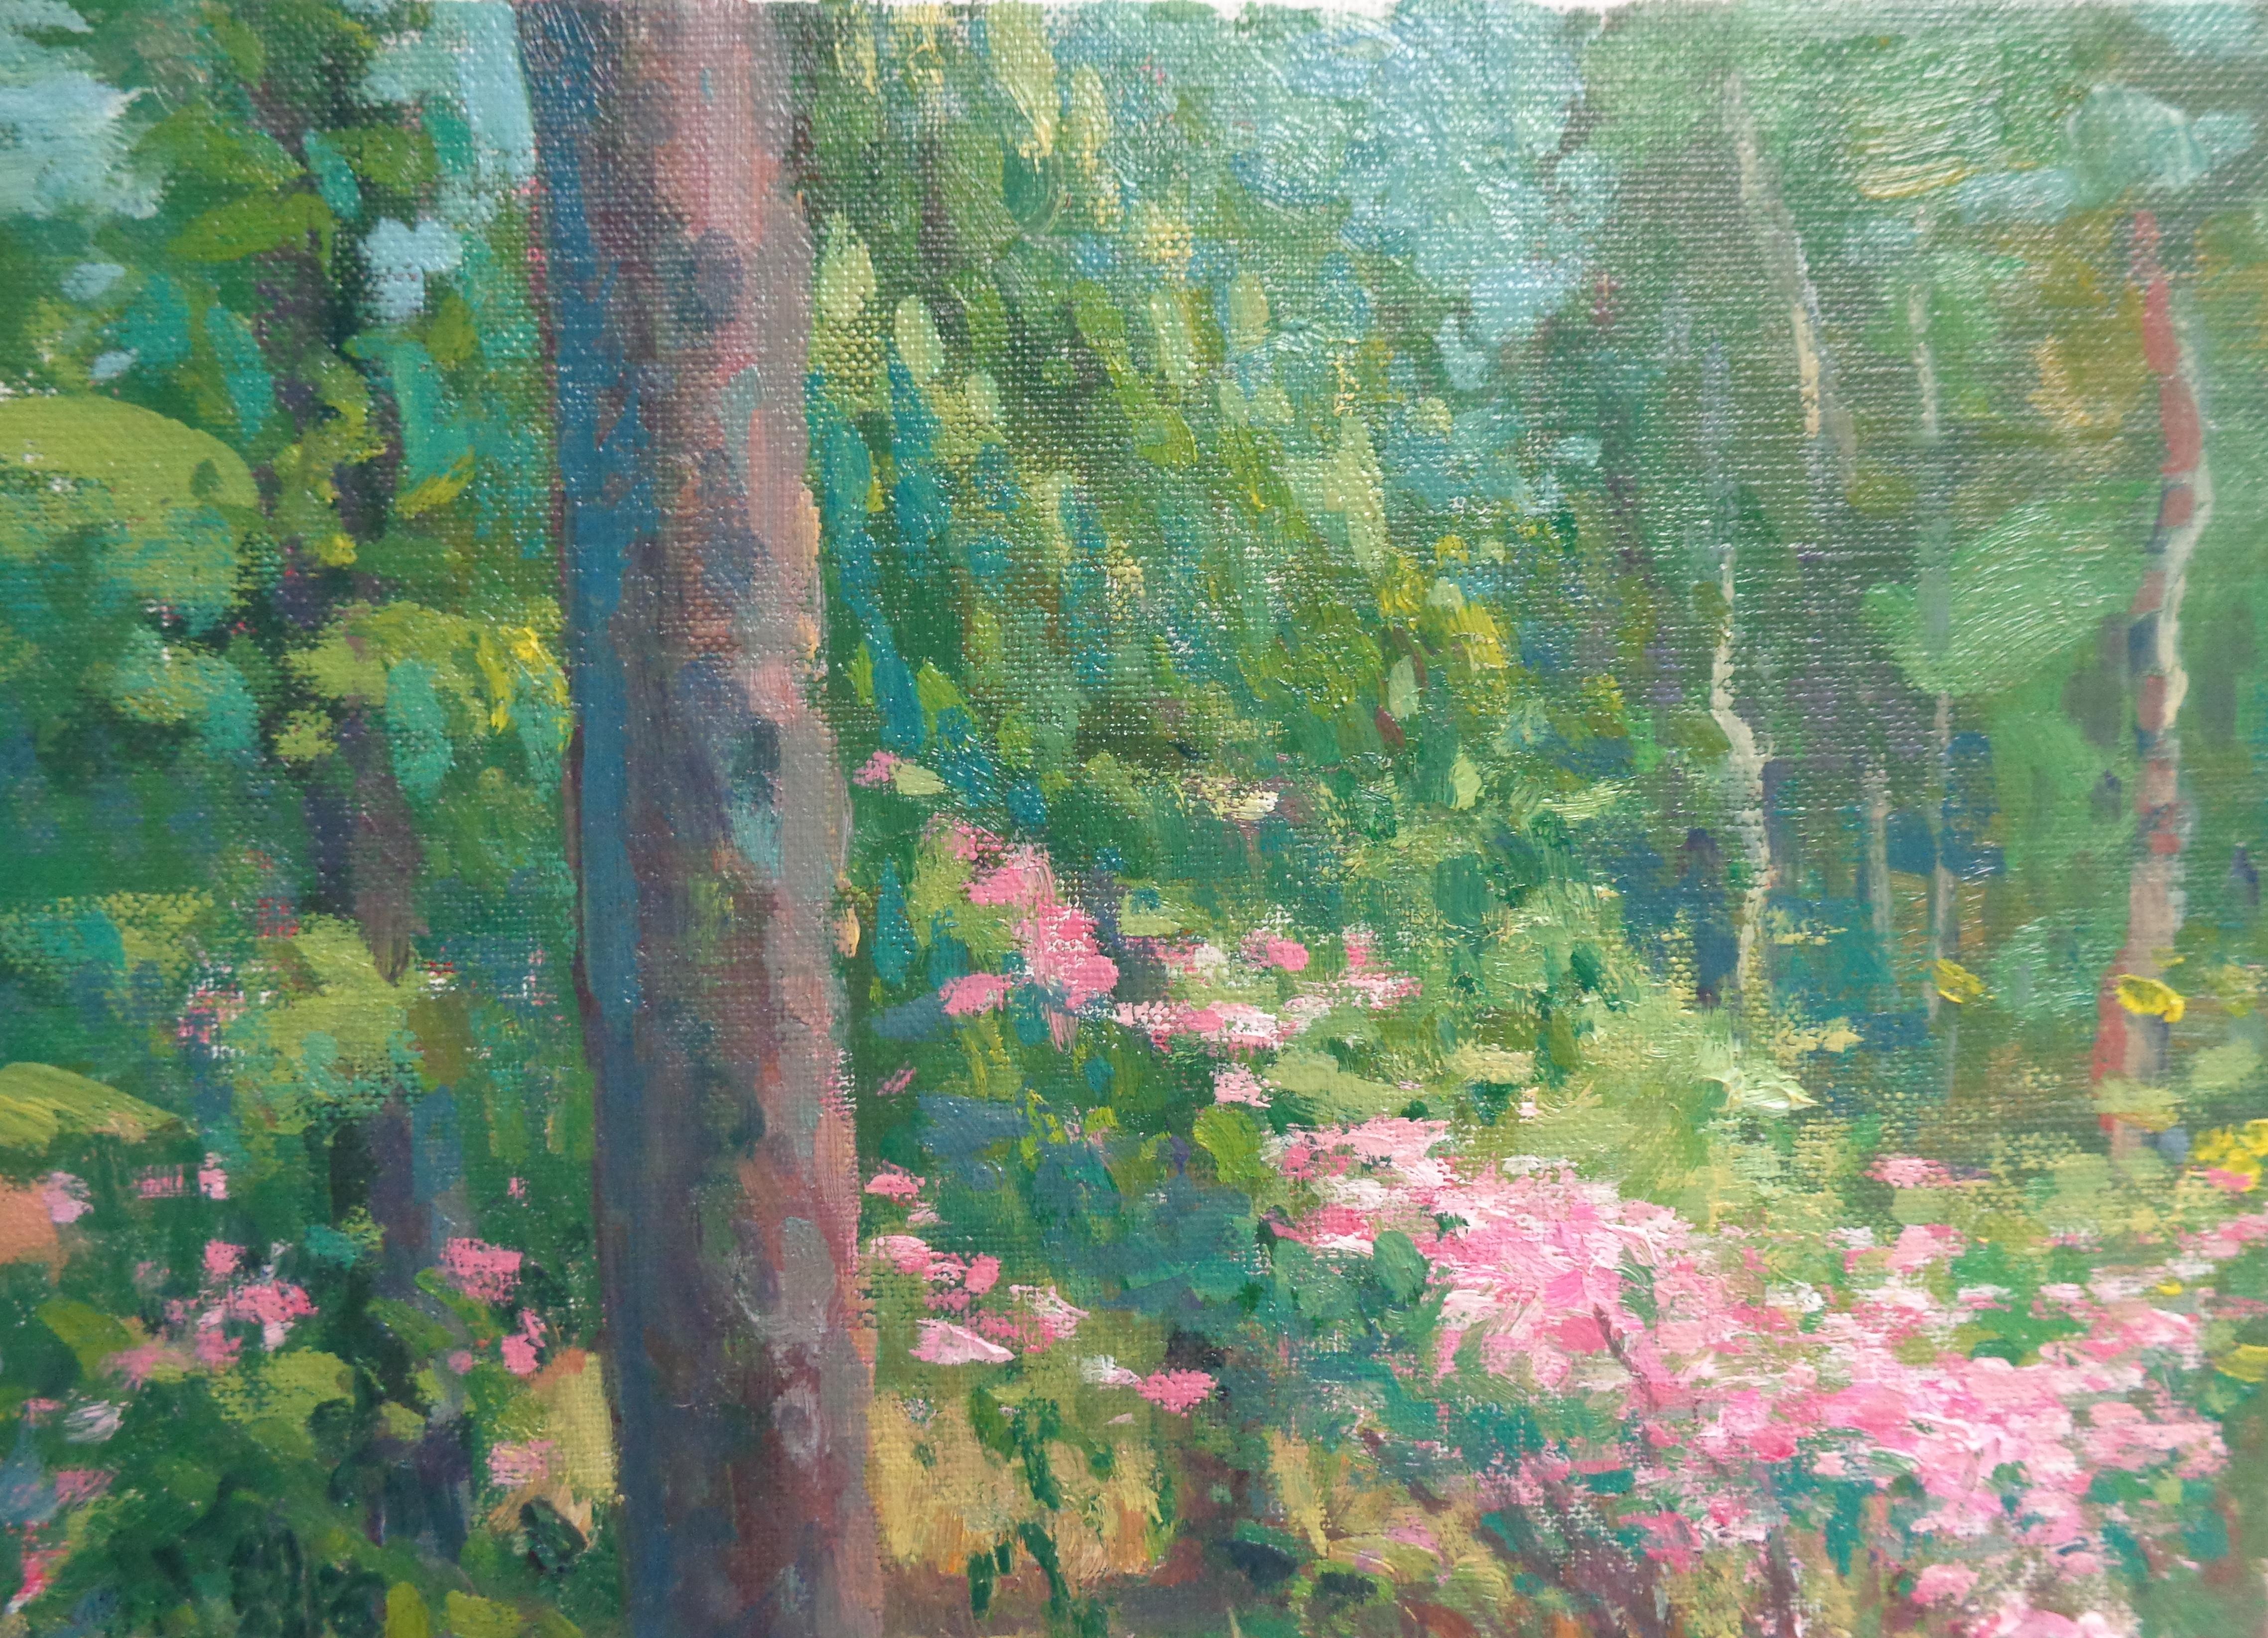  Impressionistic Floral Landscape Oil Painting by Michael Budden Early Spring For Sale 5